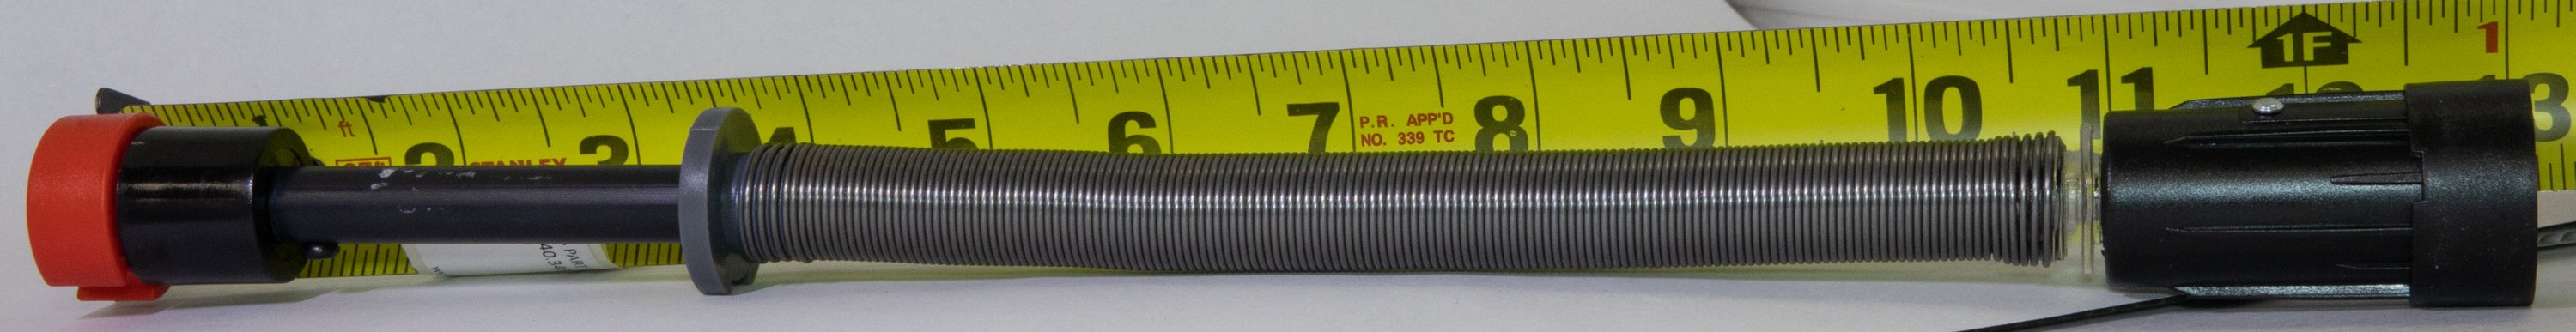 Small Gen IV 28mm Spring (18-38 in wide shades), Manual 40.345